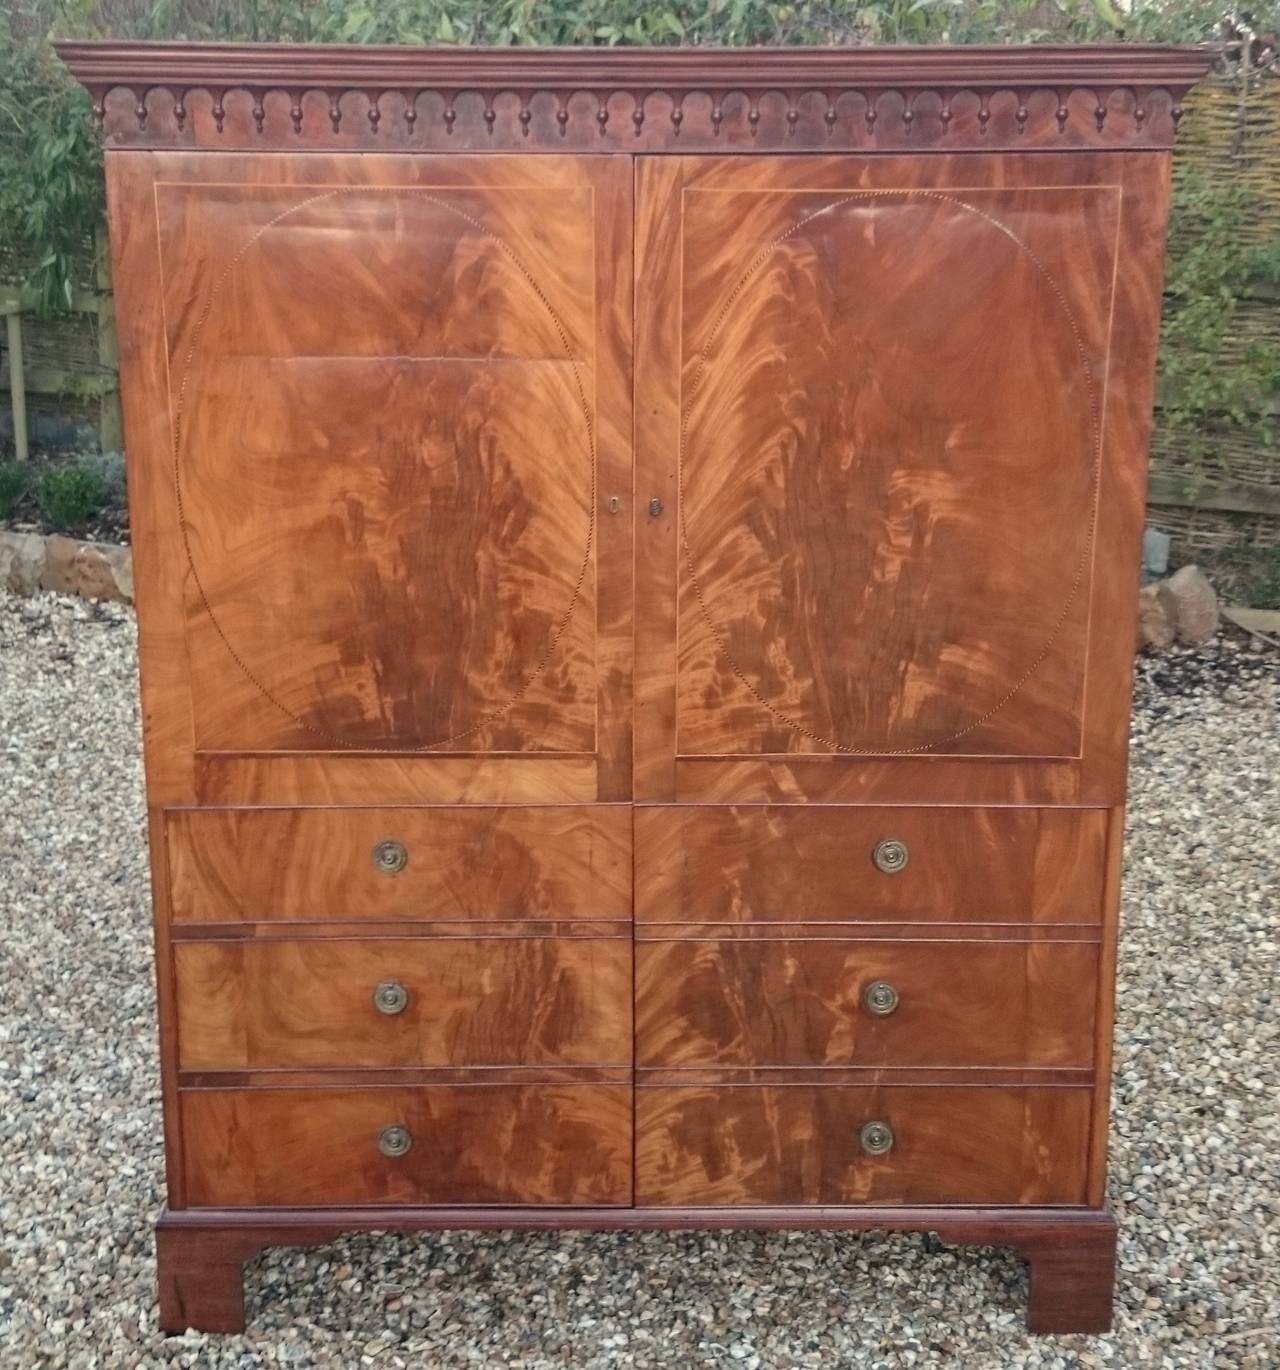 Antique wardrobe that looks like an antique linen press. This wardrobe has false drawers to make it look like a linen press, presumably because it had a pair that was a linen press, but we may never solve this mystery for sure. The timber is flame